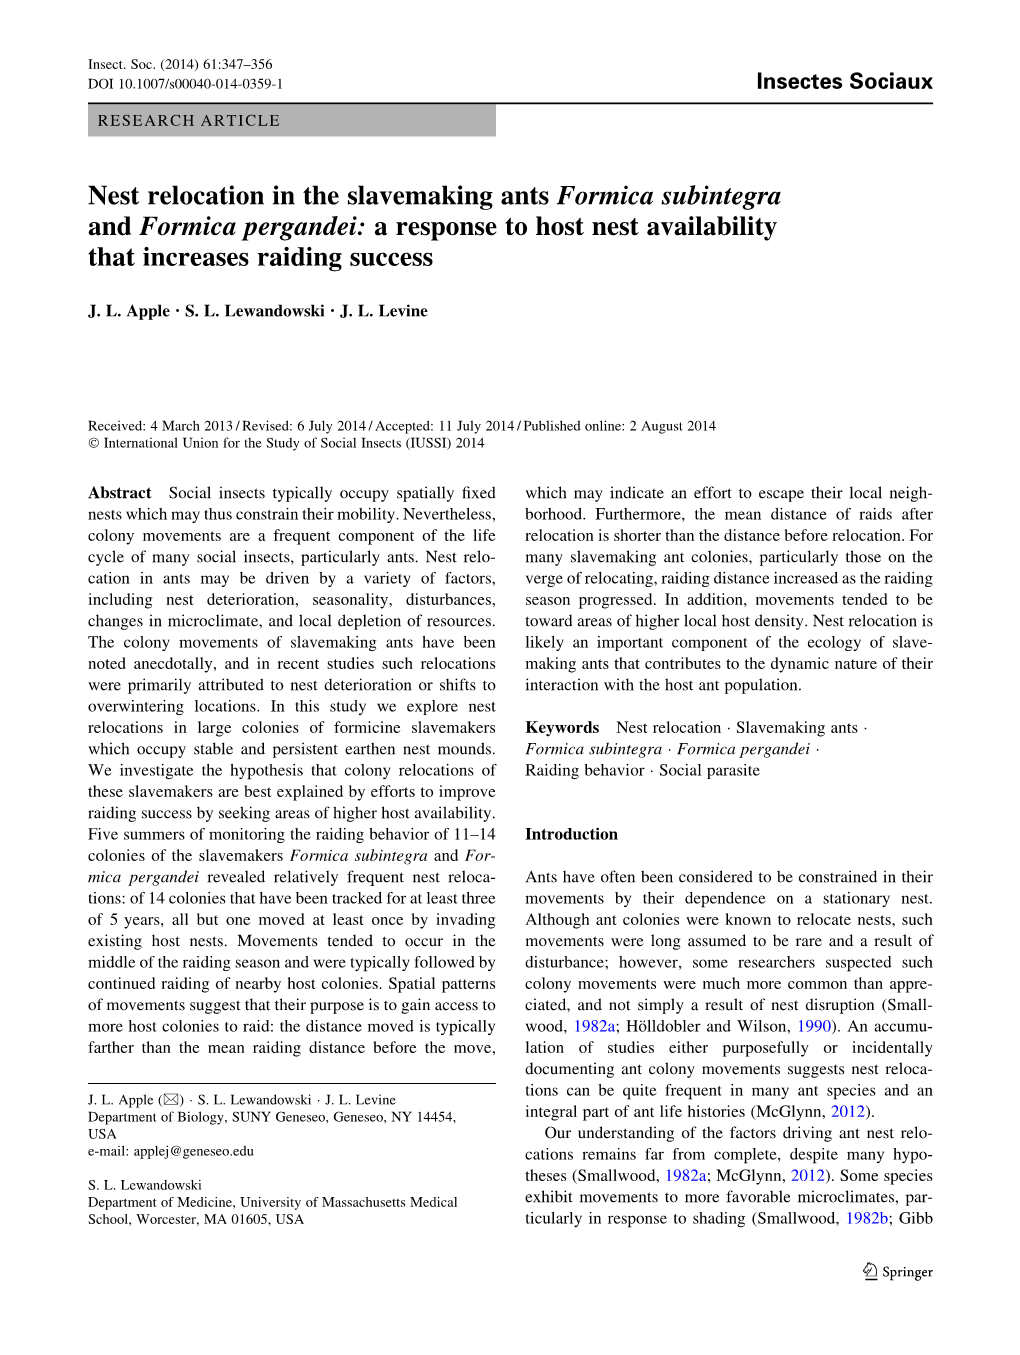 Nest Relocation in the Slavemaking Ants Formica Subintegra and Formica Pergandei: a Response to Host Nest Availability That Increases Raiding Success